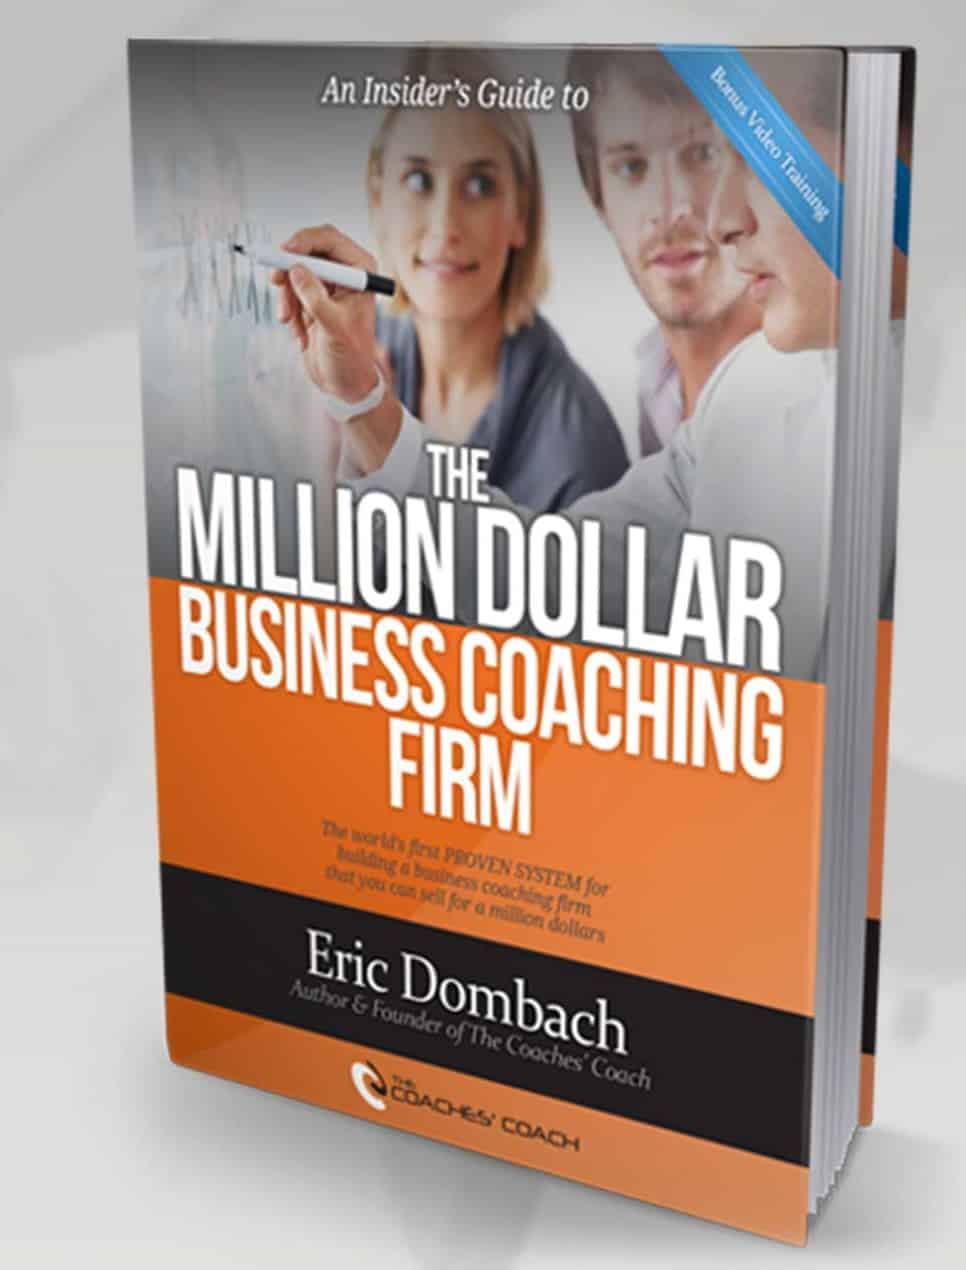 Amazon’s Authoritative Guide to Setting Up a Coaching Business